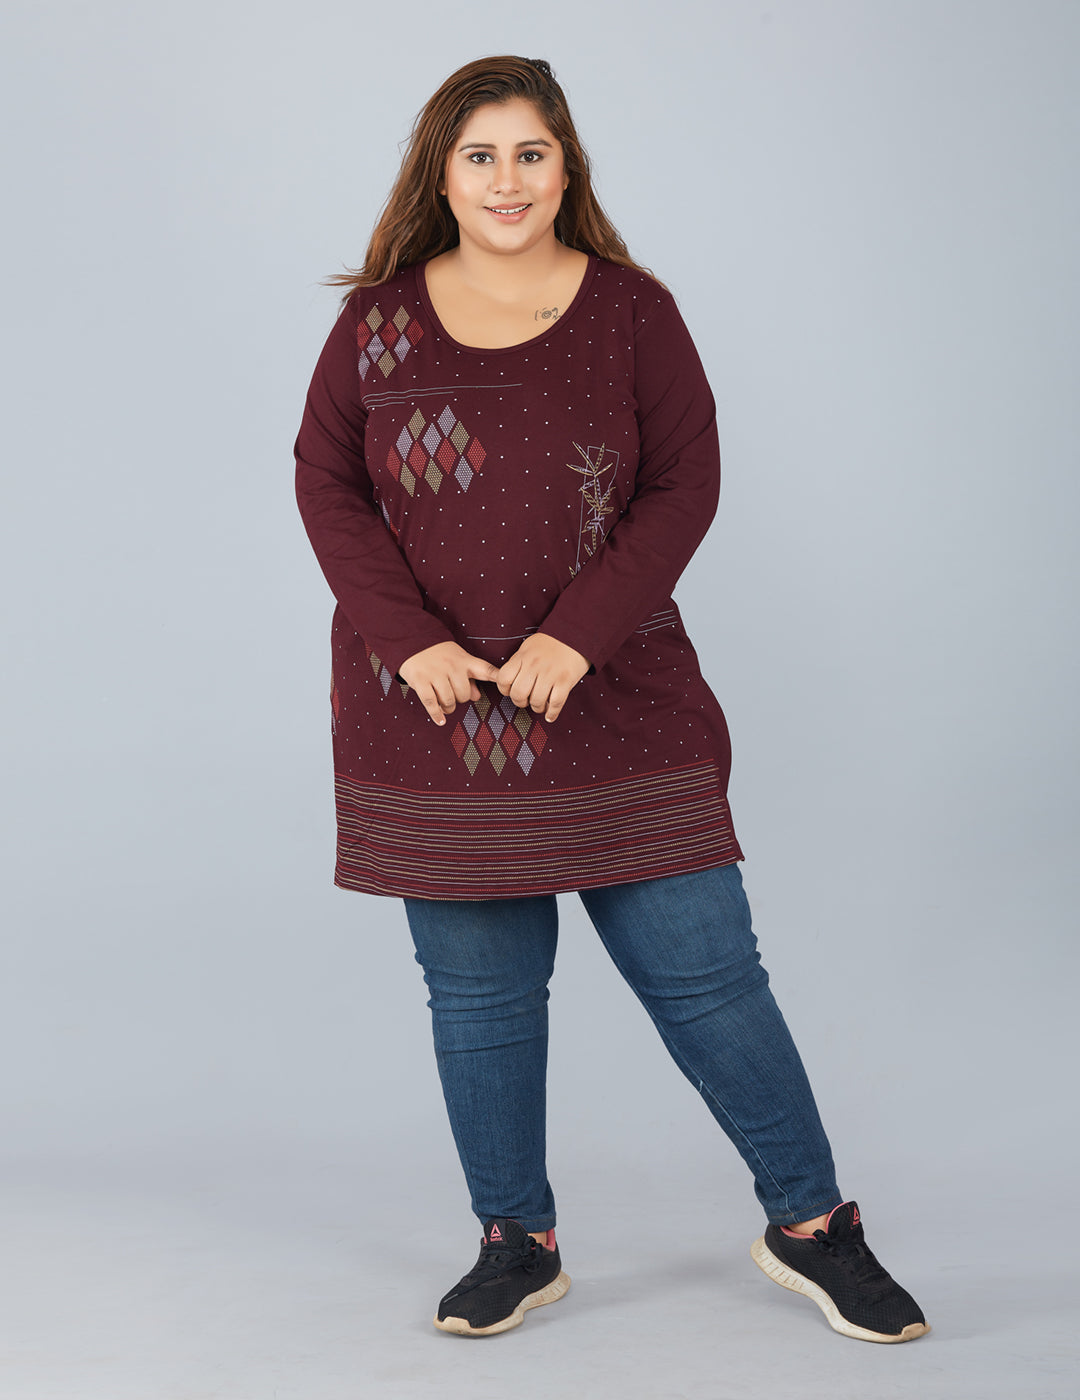 Buy Comfortable Full Sleeves Plus Size Cotton Long Top For Women